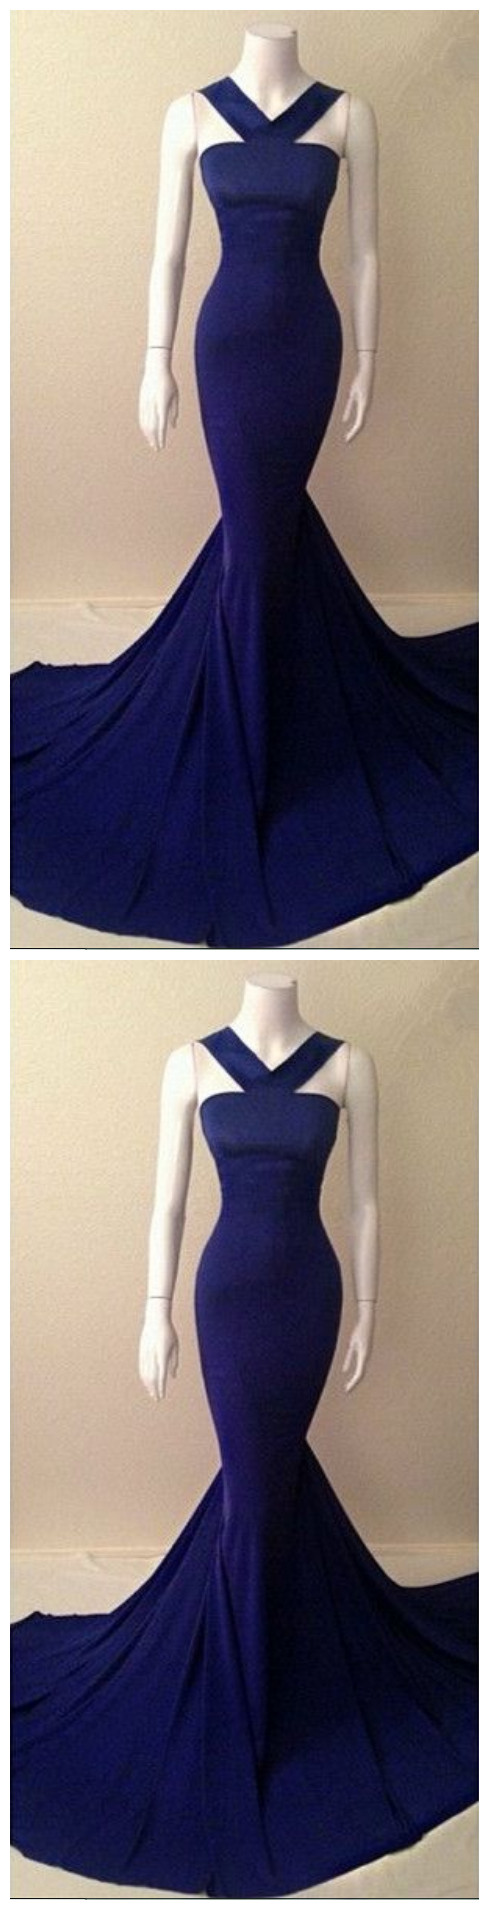 Prom Gown,prom Dress,mermaid Prom Gown,royal Blue Evening Gowns,party Dresses,mermaid Evening Gowns,sexy Formal Dress For Teens